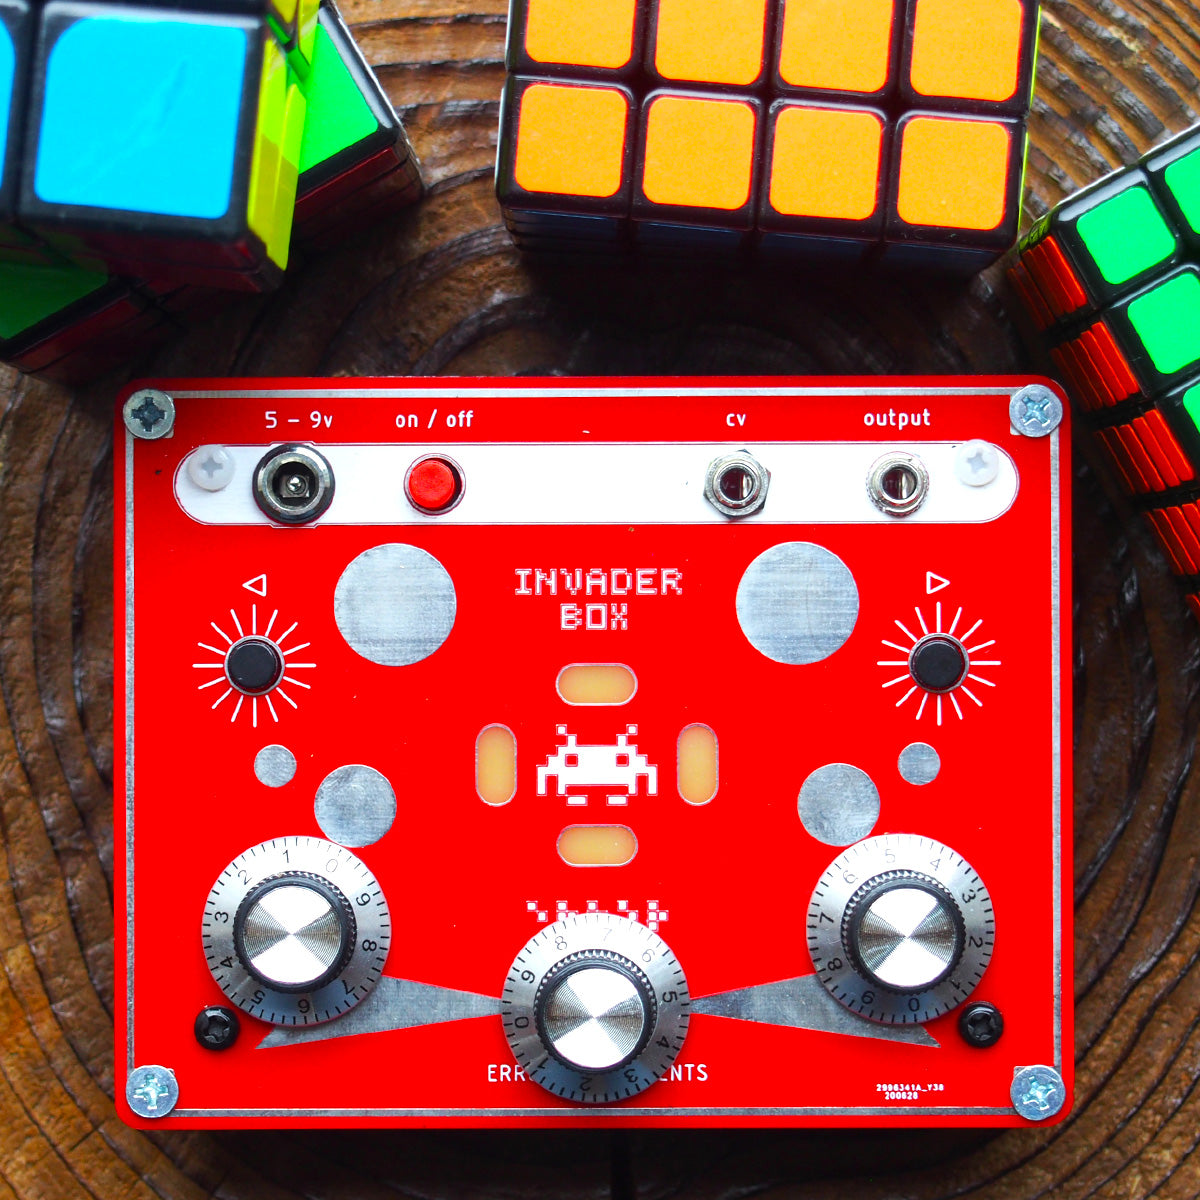 Invader Box (Red Limited Edition)